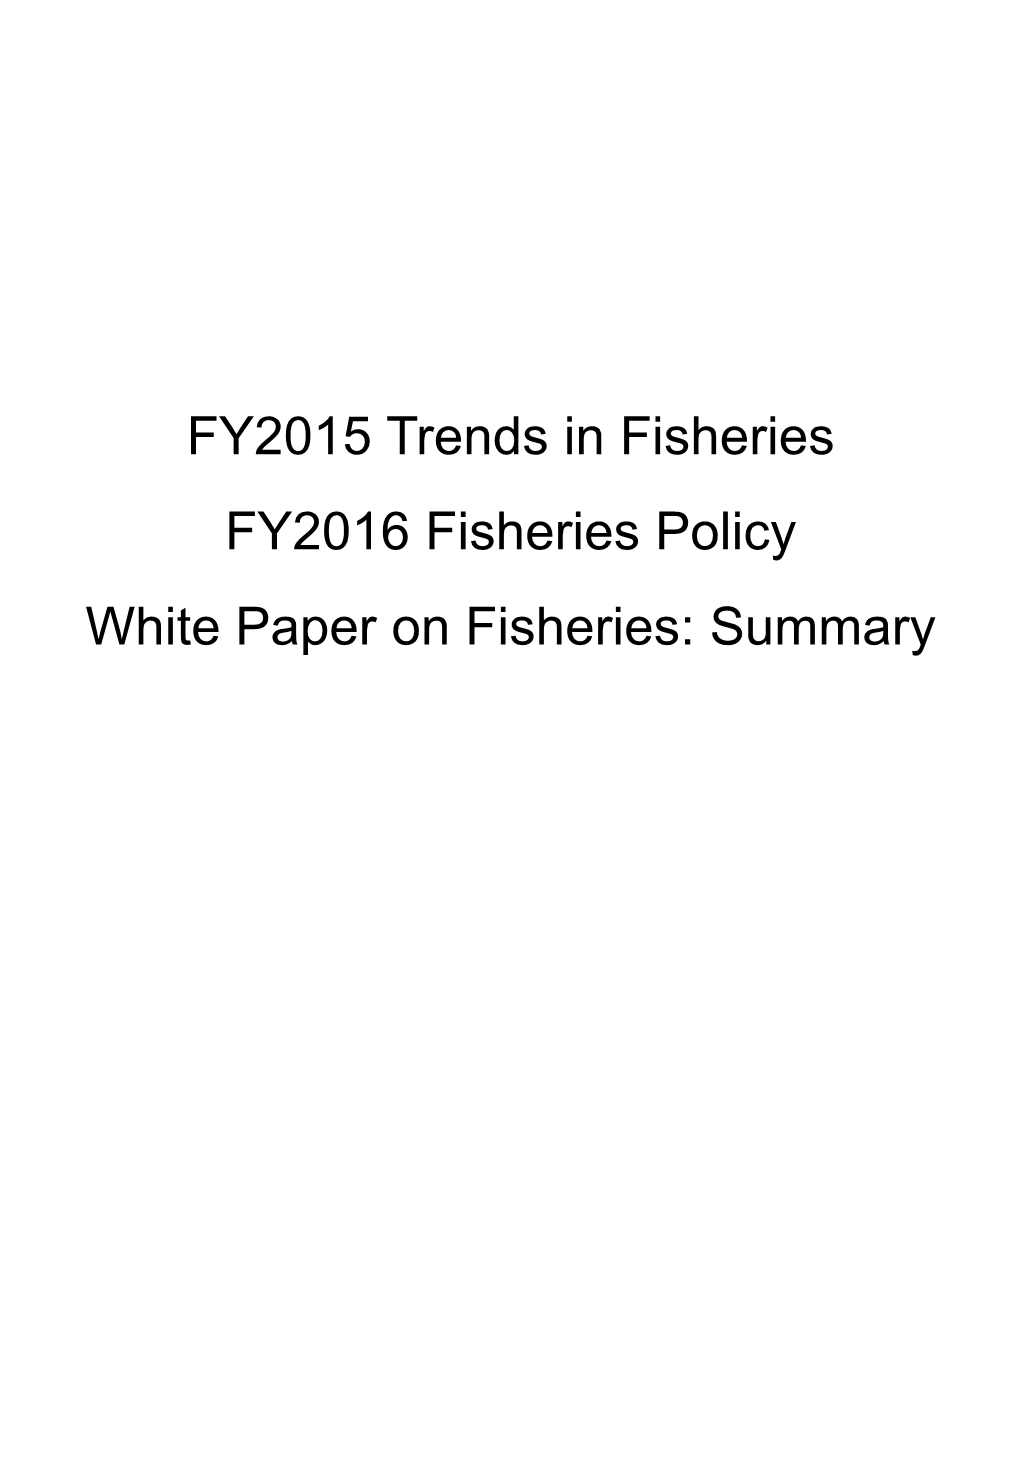 FY2015 Trends in Fisheries FY2016 Fisheries Policy White Paper on Fisheries: Summary Table of Contents